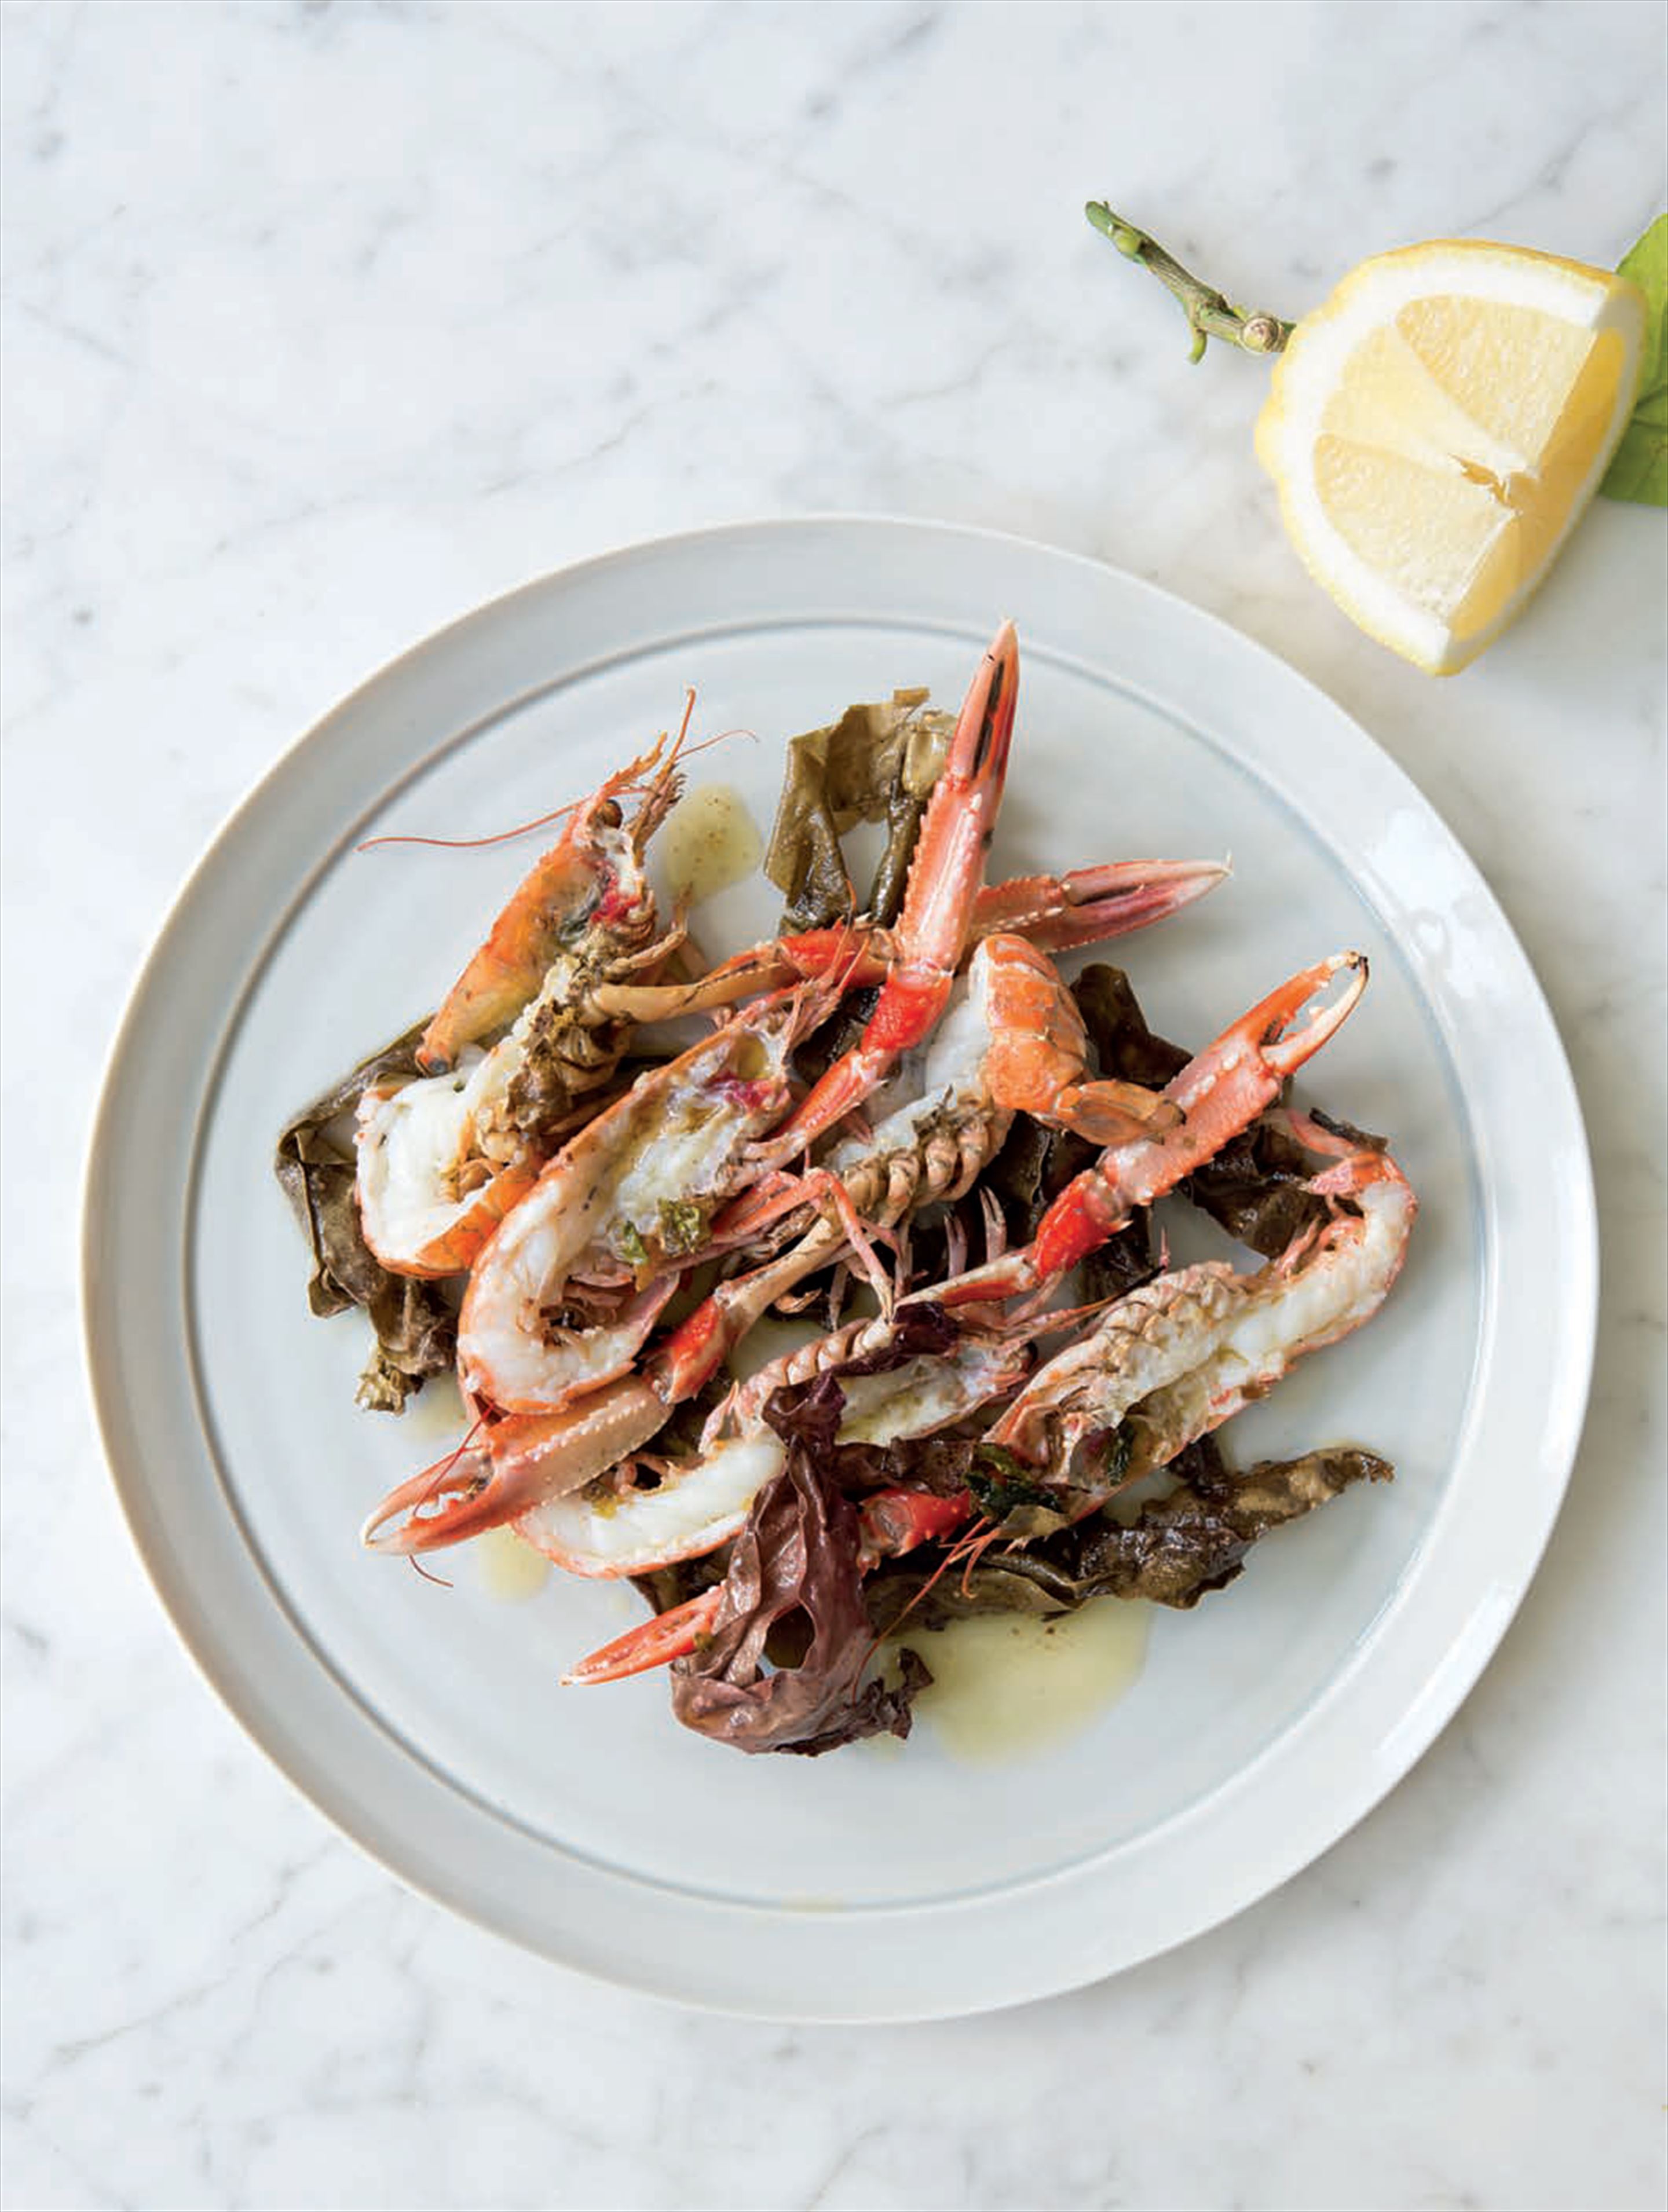 Grilled langoustine with seaweed butter